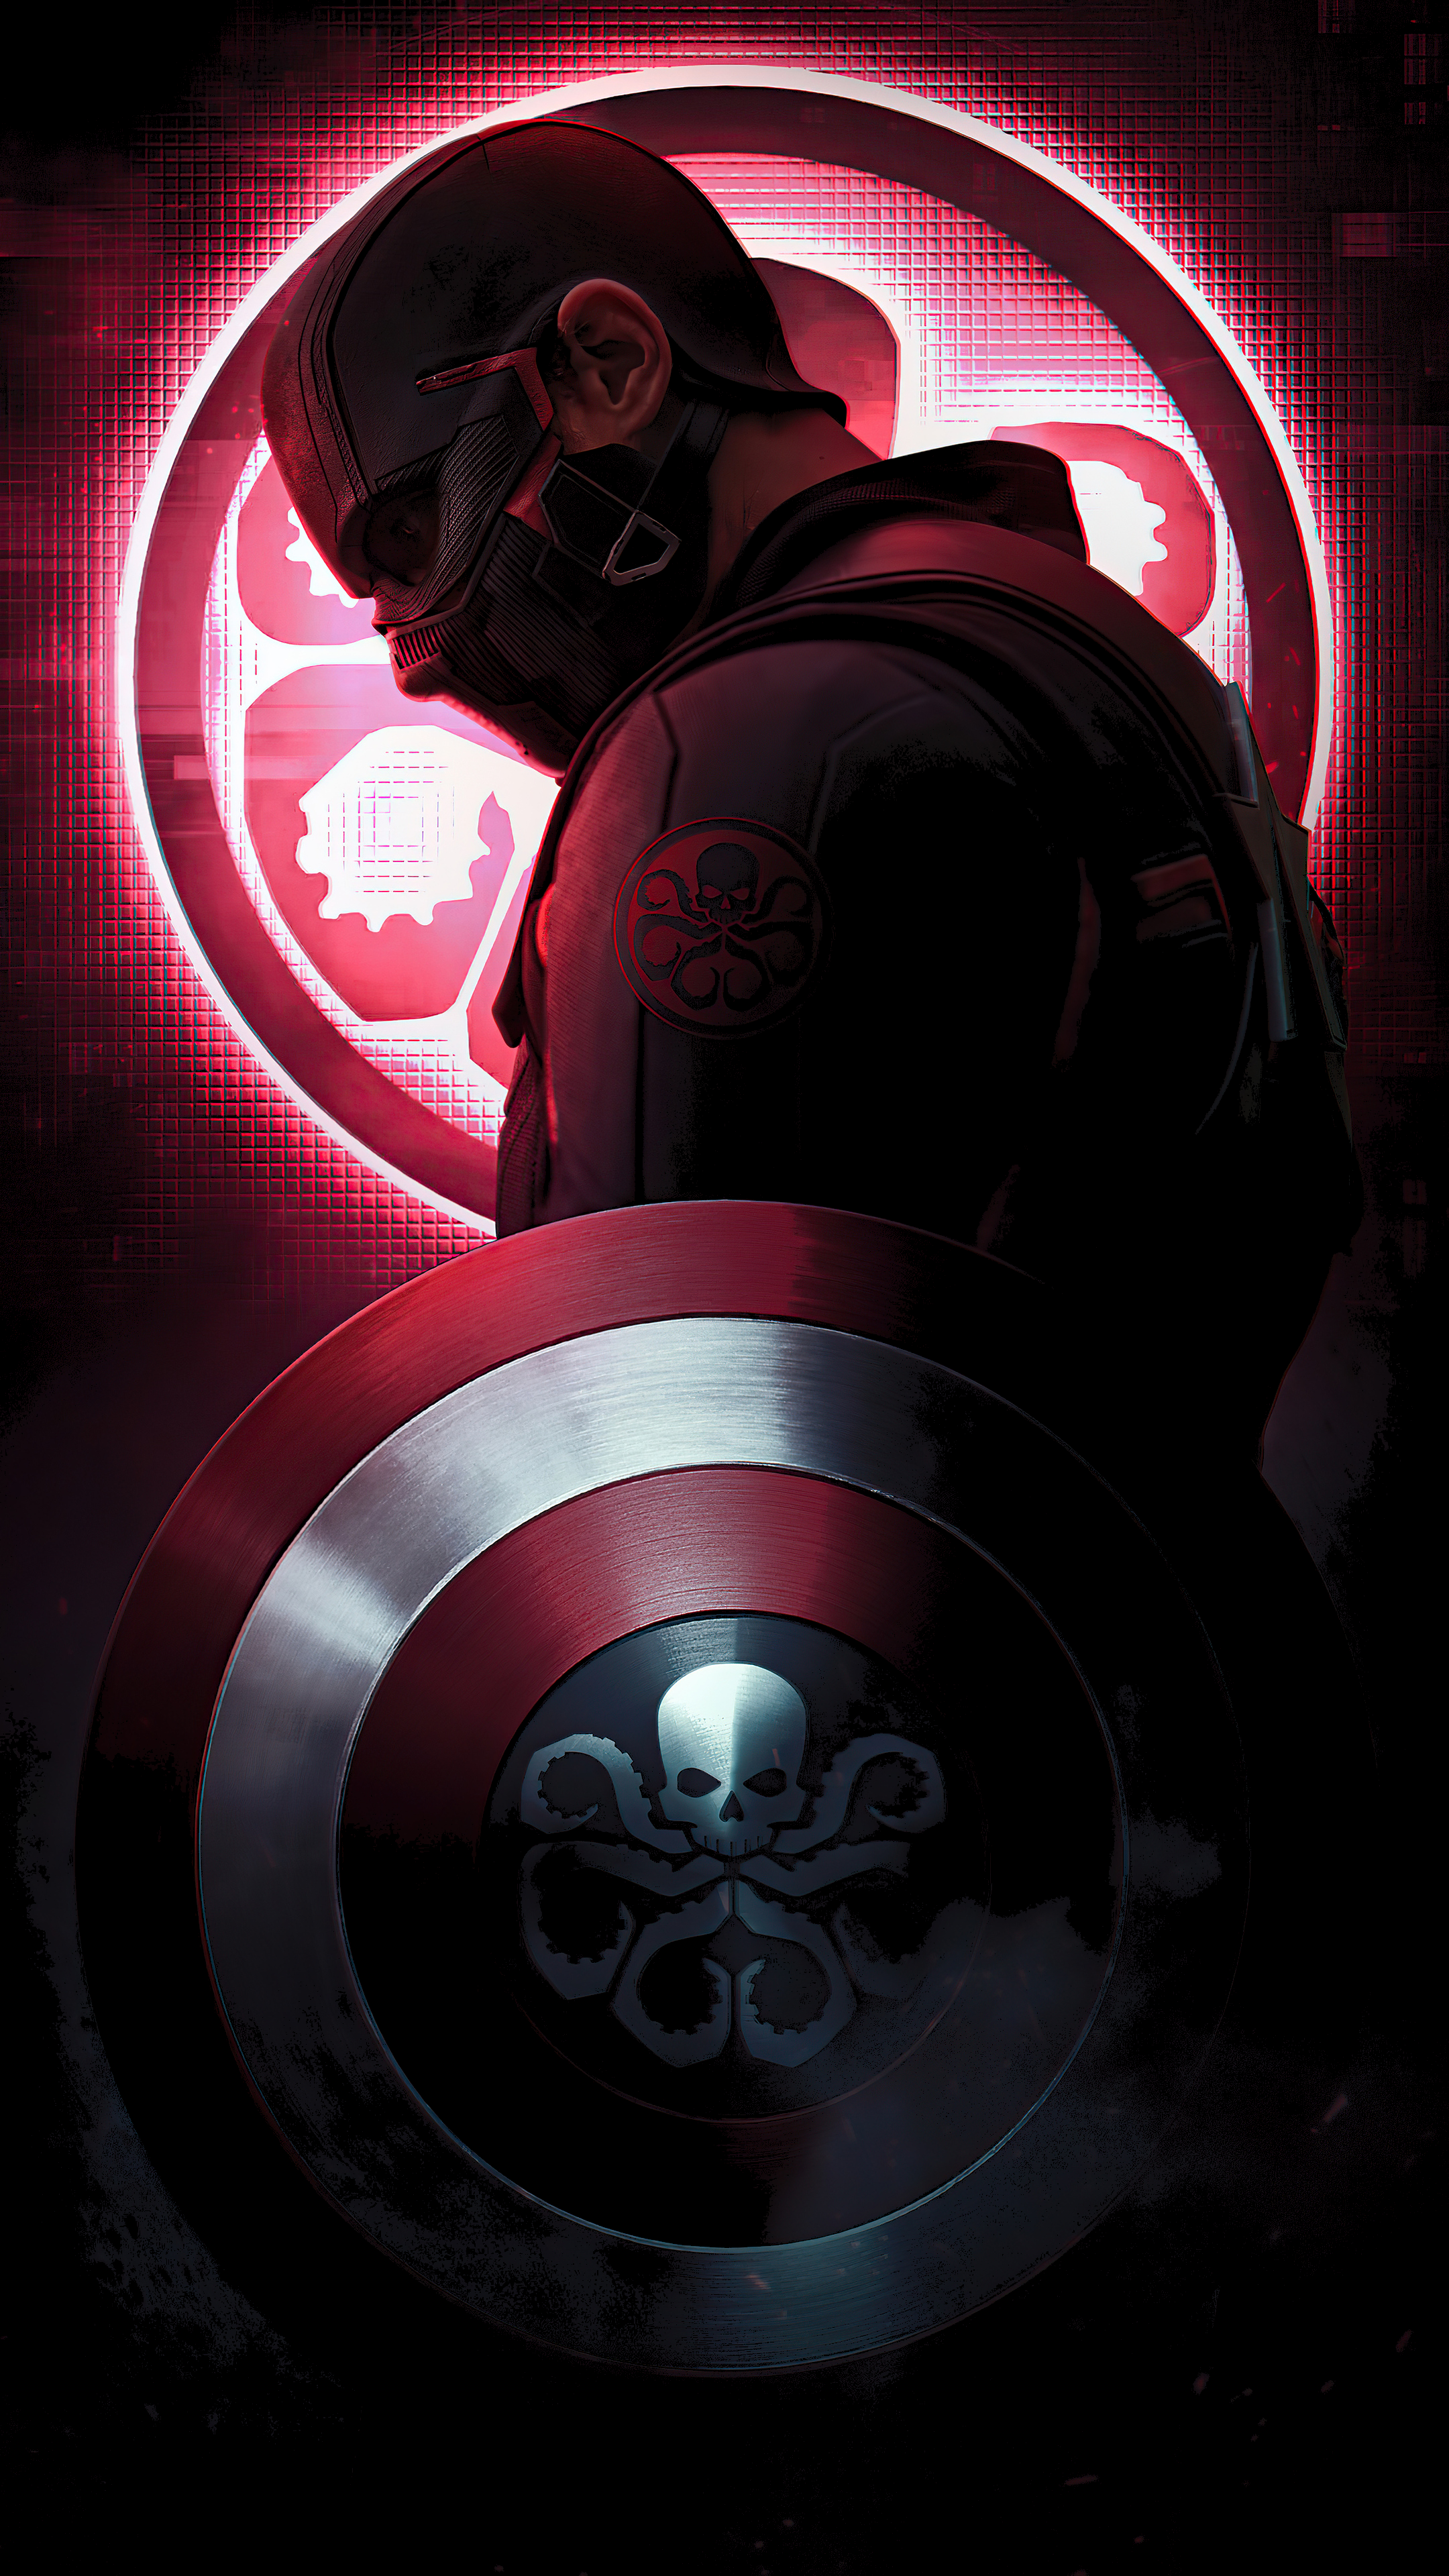 Captain America with hammer and shield Wallpaper 4k Ultra HD ID:7073